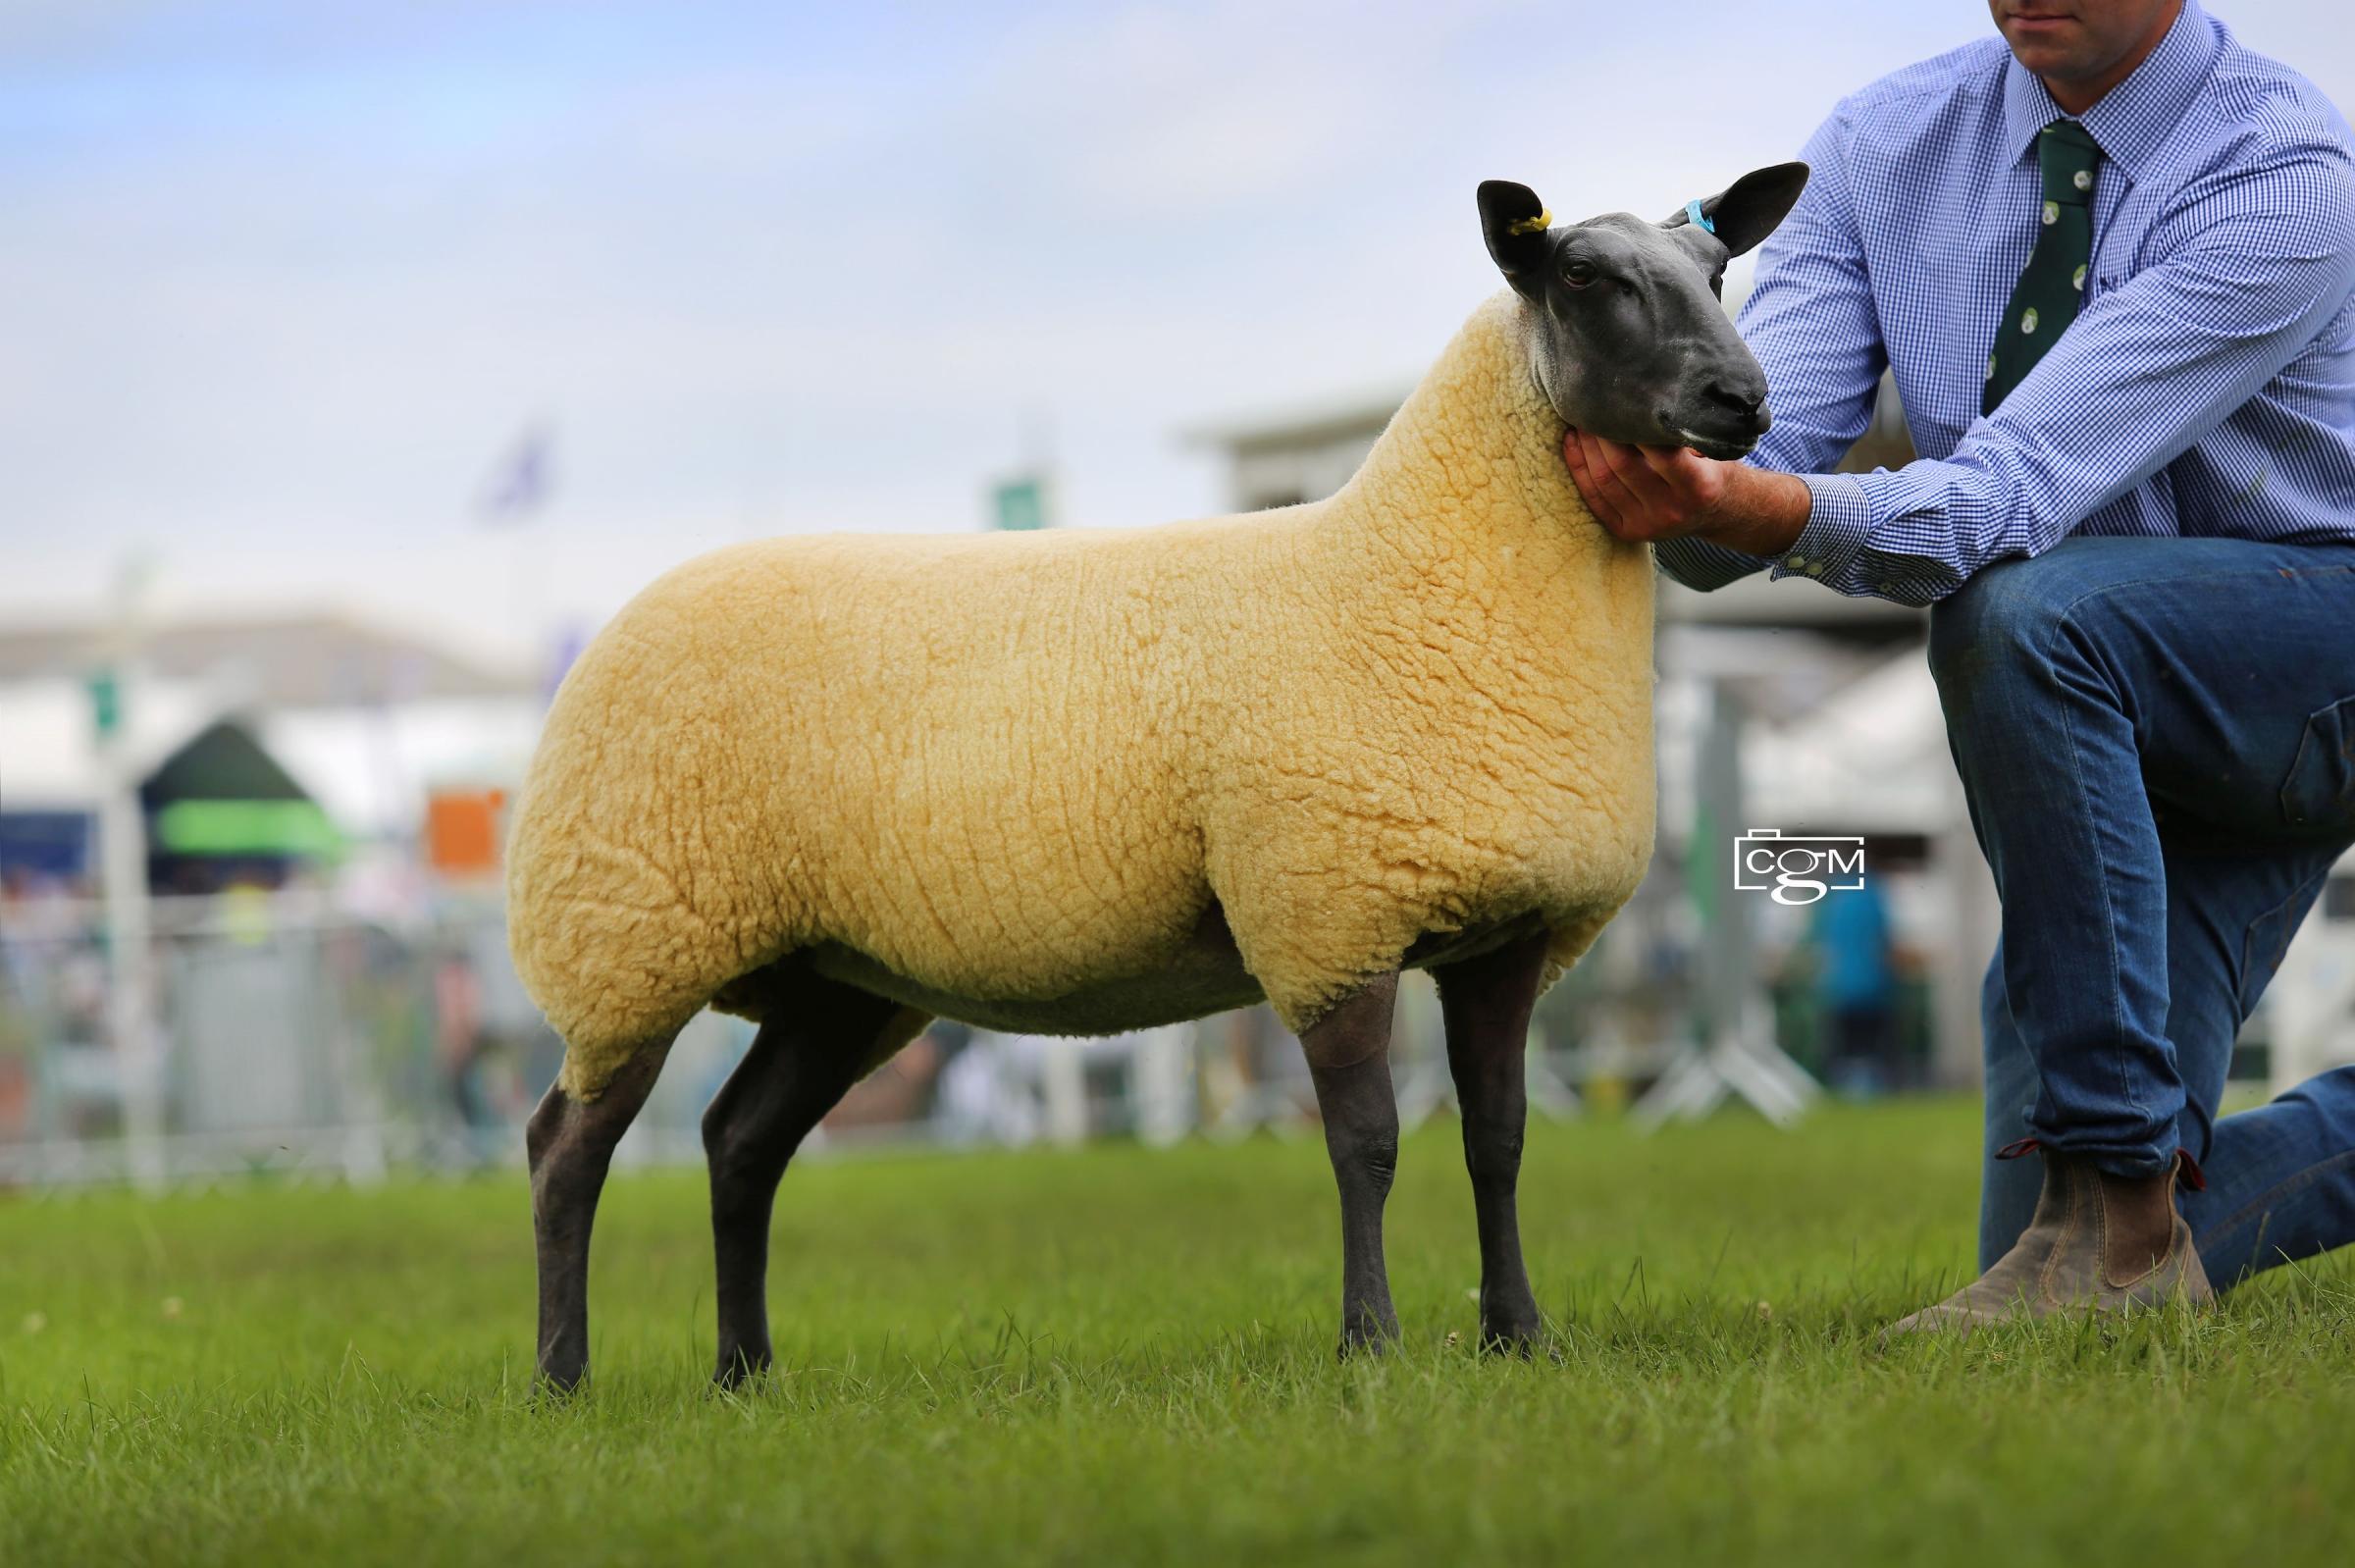 First outing for the Willpower flock was this years Great Yorkshire Show, with this ewe lamb standing first in its class 